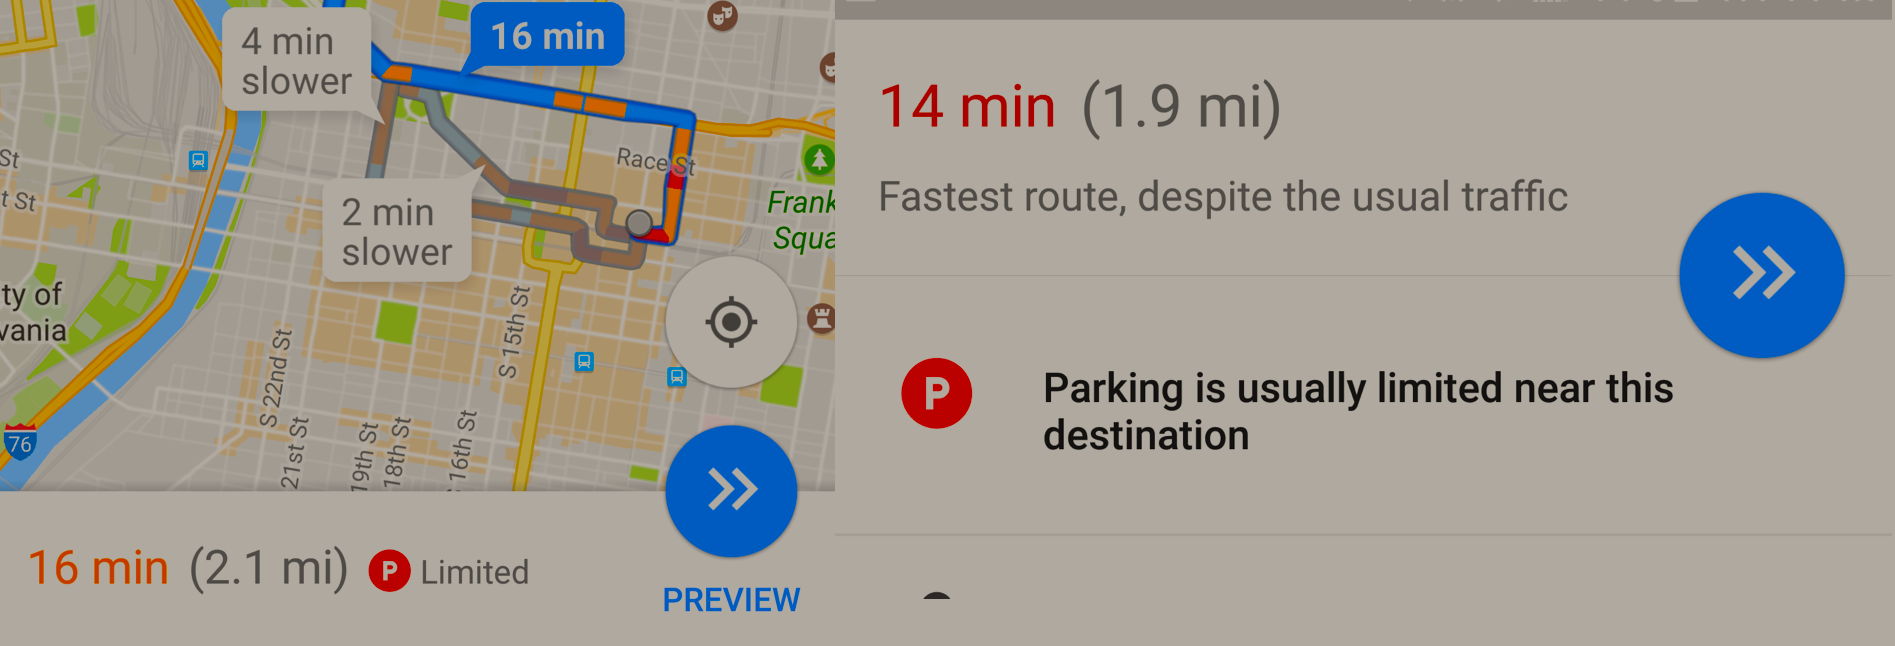 Google Maps Parking Assistant Is Live In 25 Cities